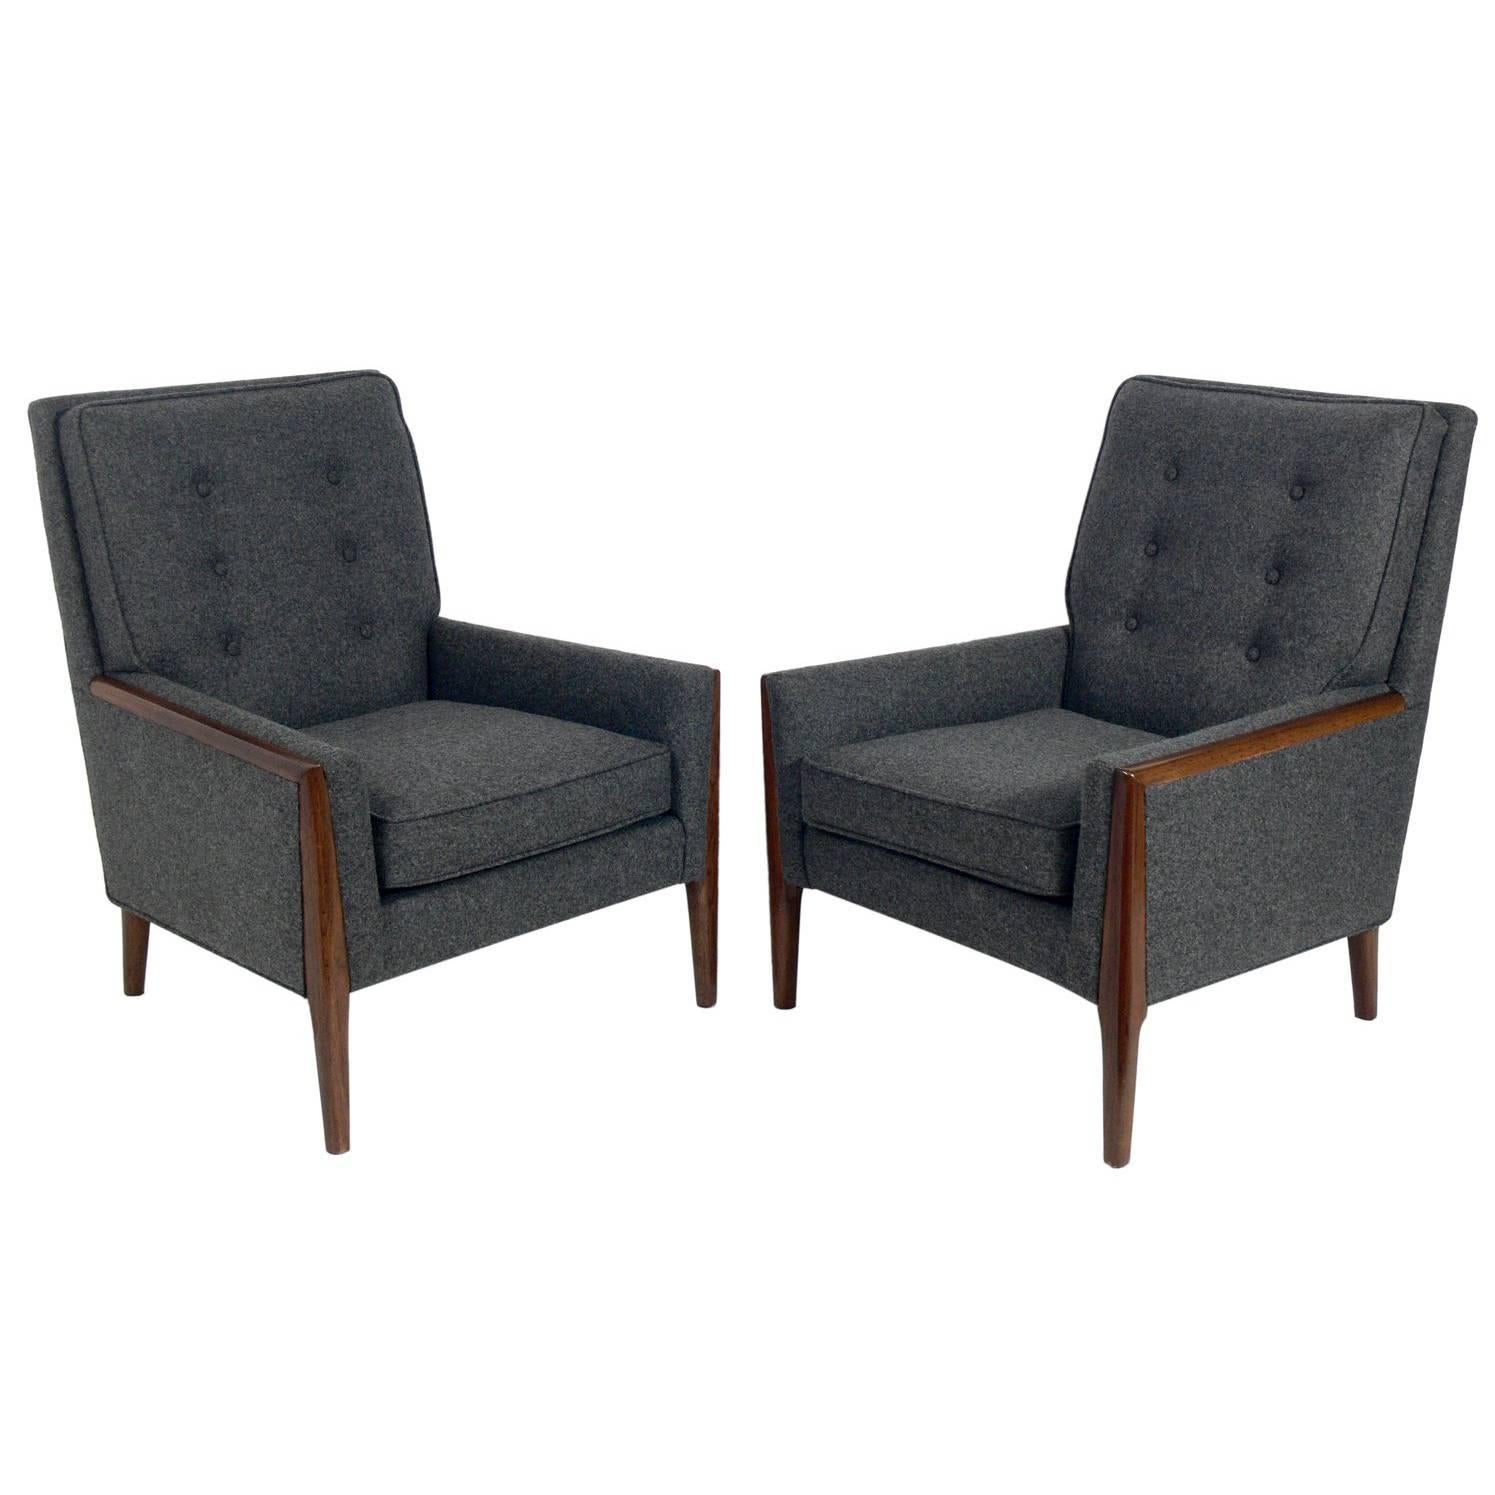 Pair of Modern Lounge Chairs in the Style of T.H. Robsjohn-Gibbings